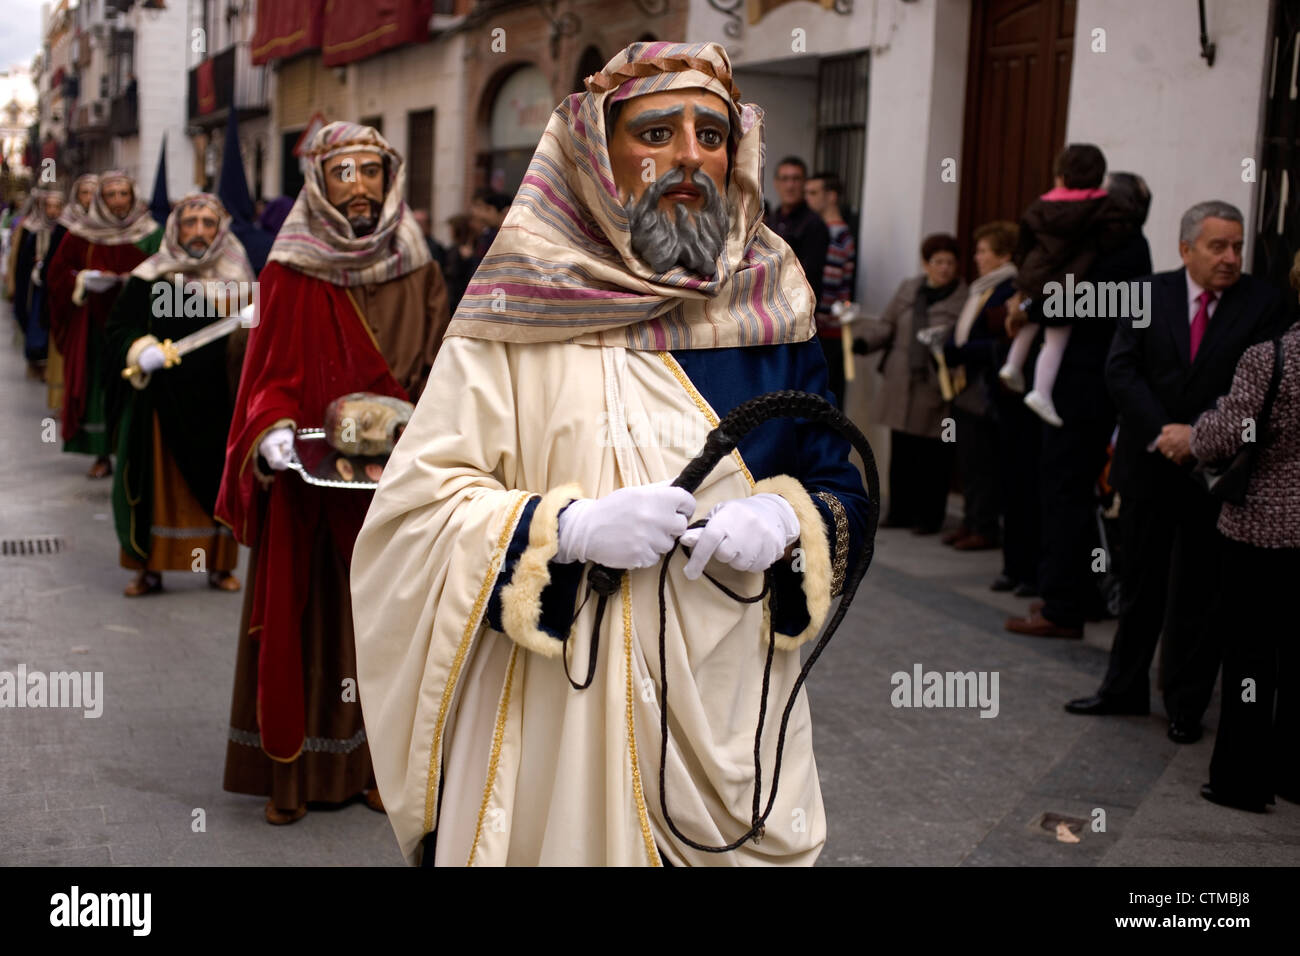 Masked men dressed as biblical characters during Easter Holy Week in Puente Genil, Cordoba, Andalusia, Spain Stock Photo